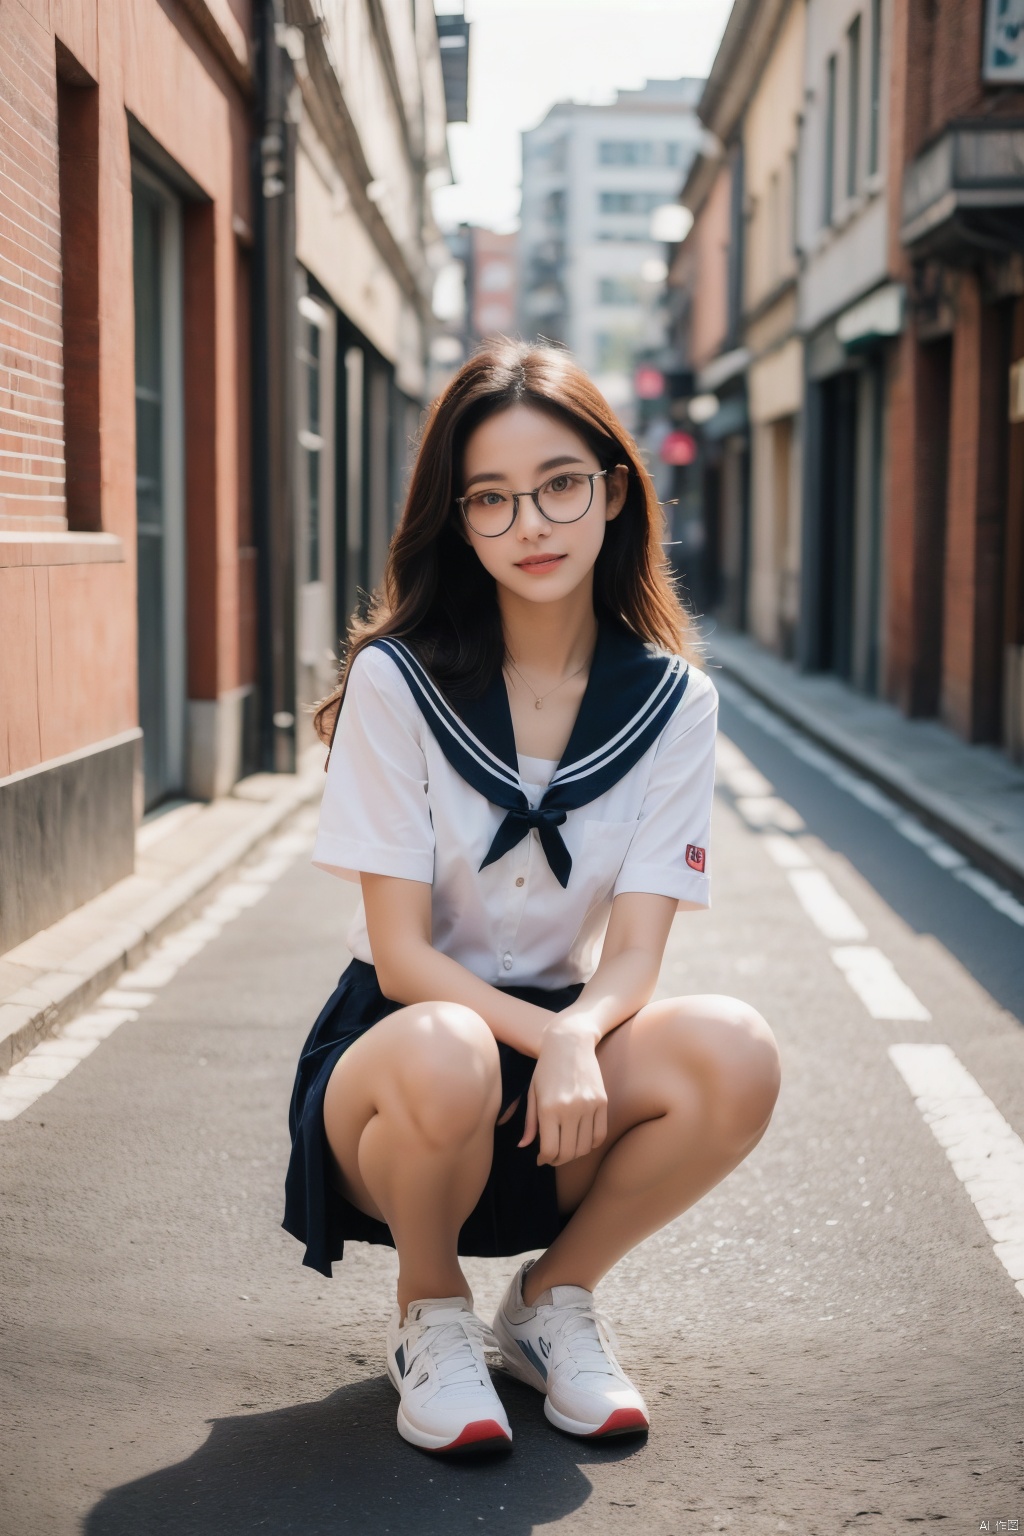  Enhancement, masterpiece, 16K, sunset glow, JK, 1 girl, 20 years old, height 170cm, small chest, slender legs, glasses, long hair, school uniform, dress, sports shoes, squatting on the side, background pedestrian street, focus on the girl